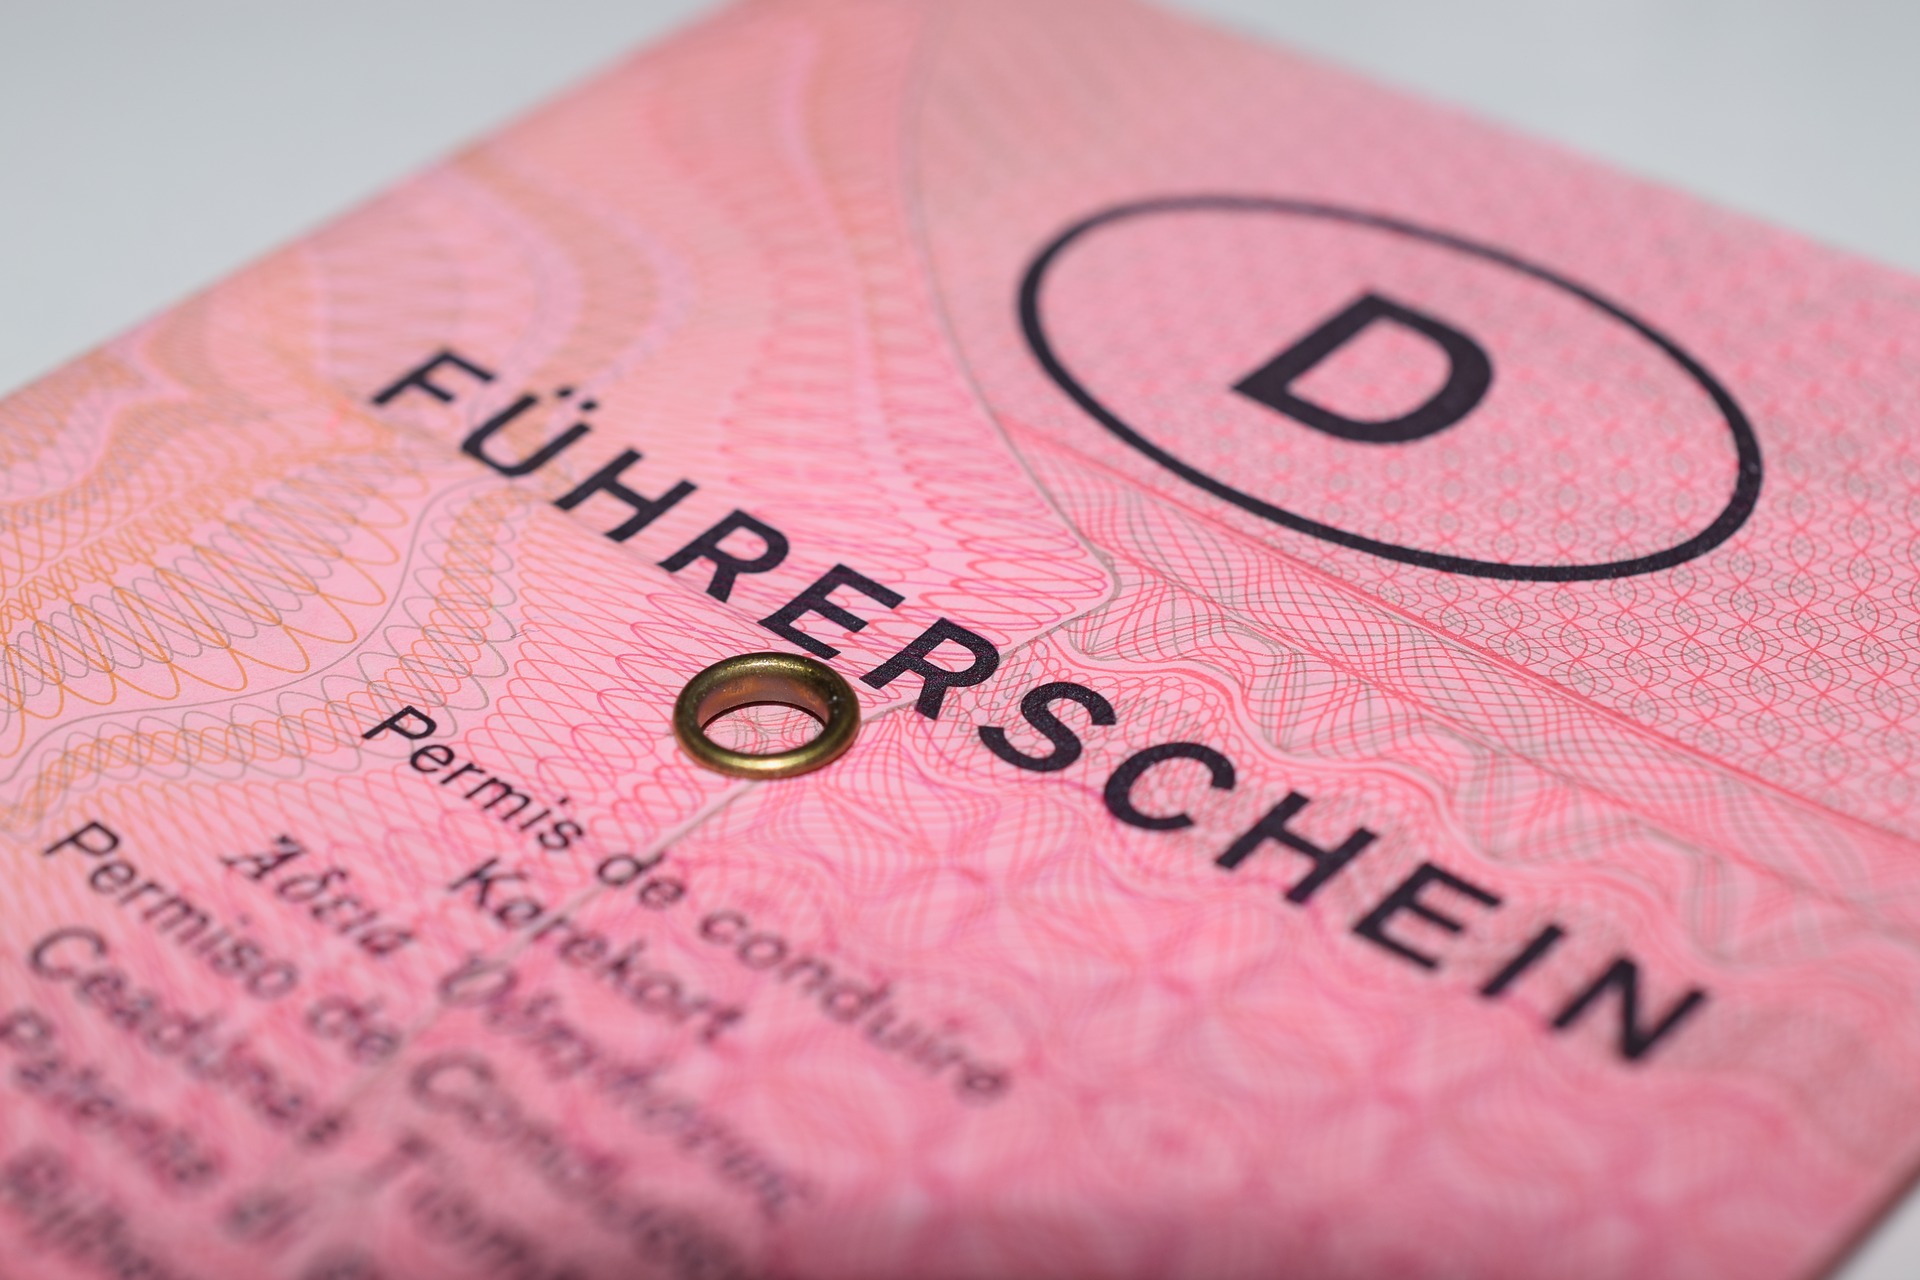 The pink EC driving licence